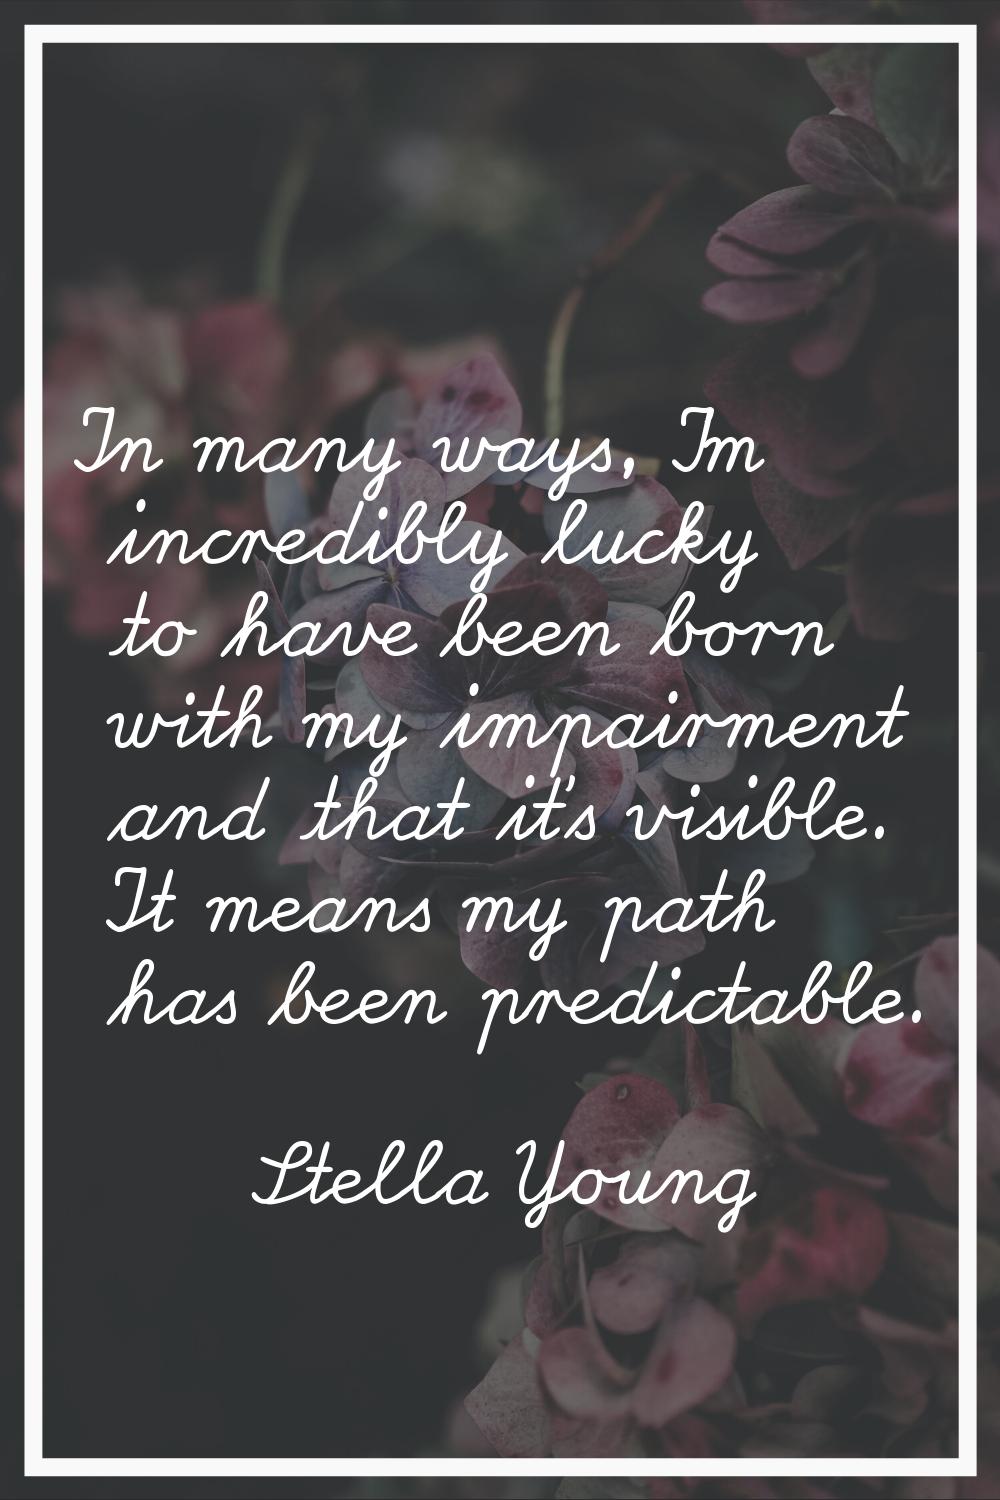 In many ways, I'm incredibly lucky to have been born with my impairment and that it's visible. It m